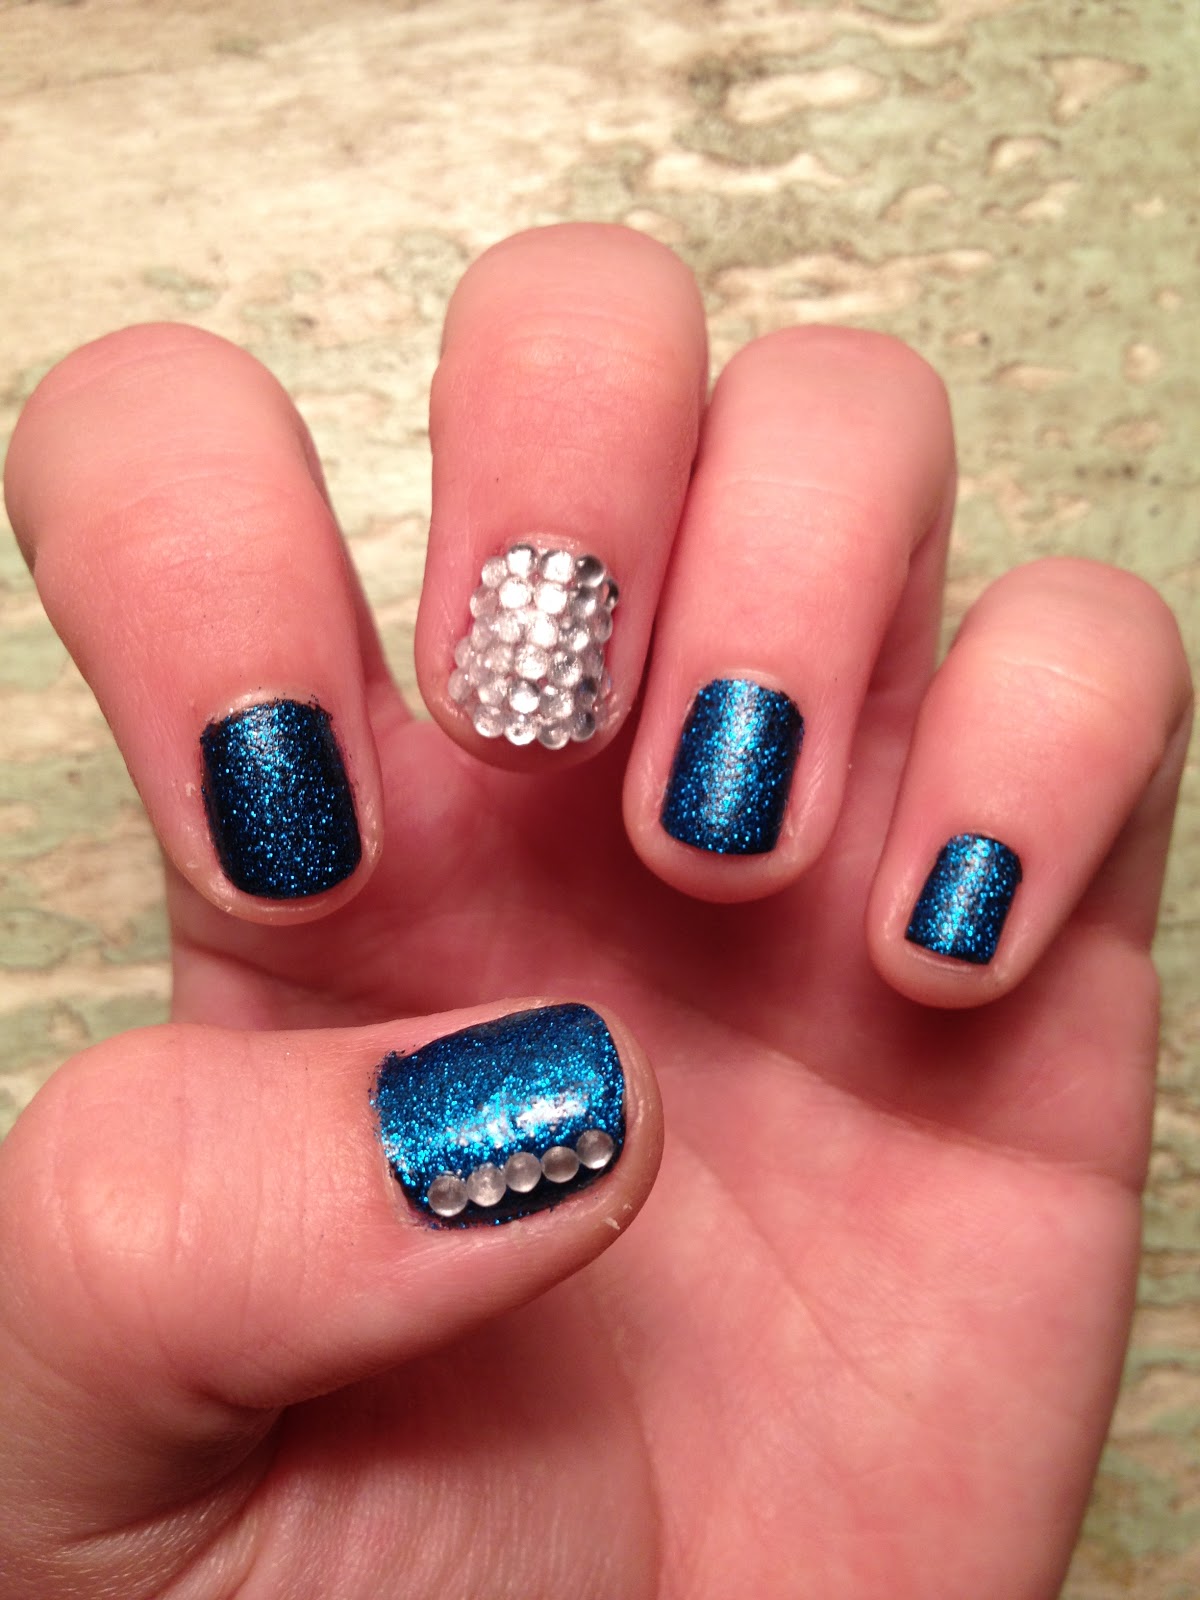 Miscellaneous Manicures: Two Glitter Manicures - Maynicure Challenge #4